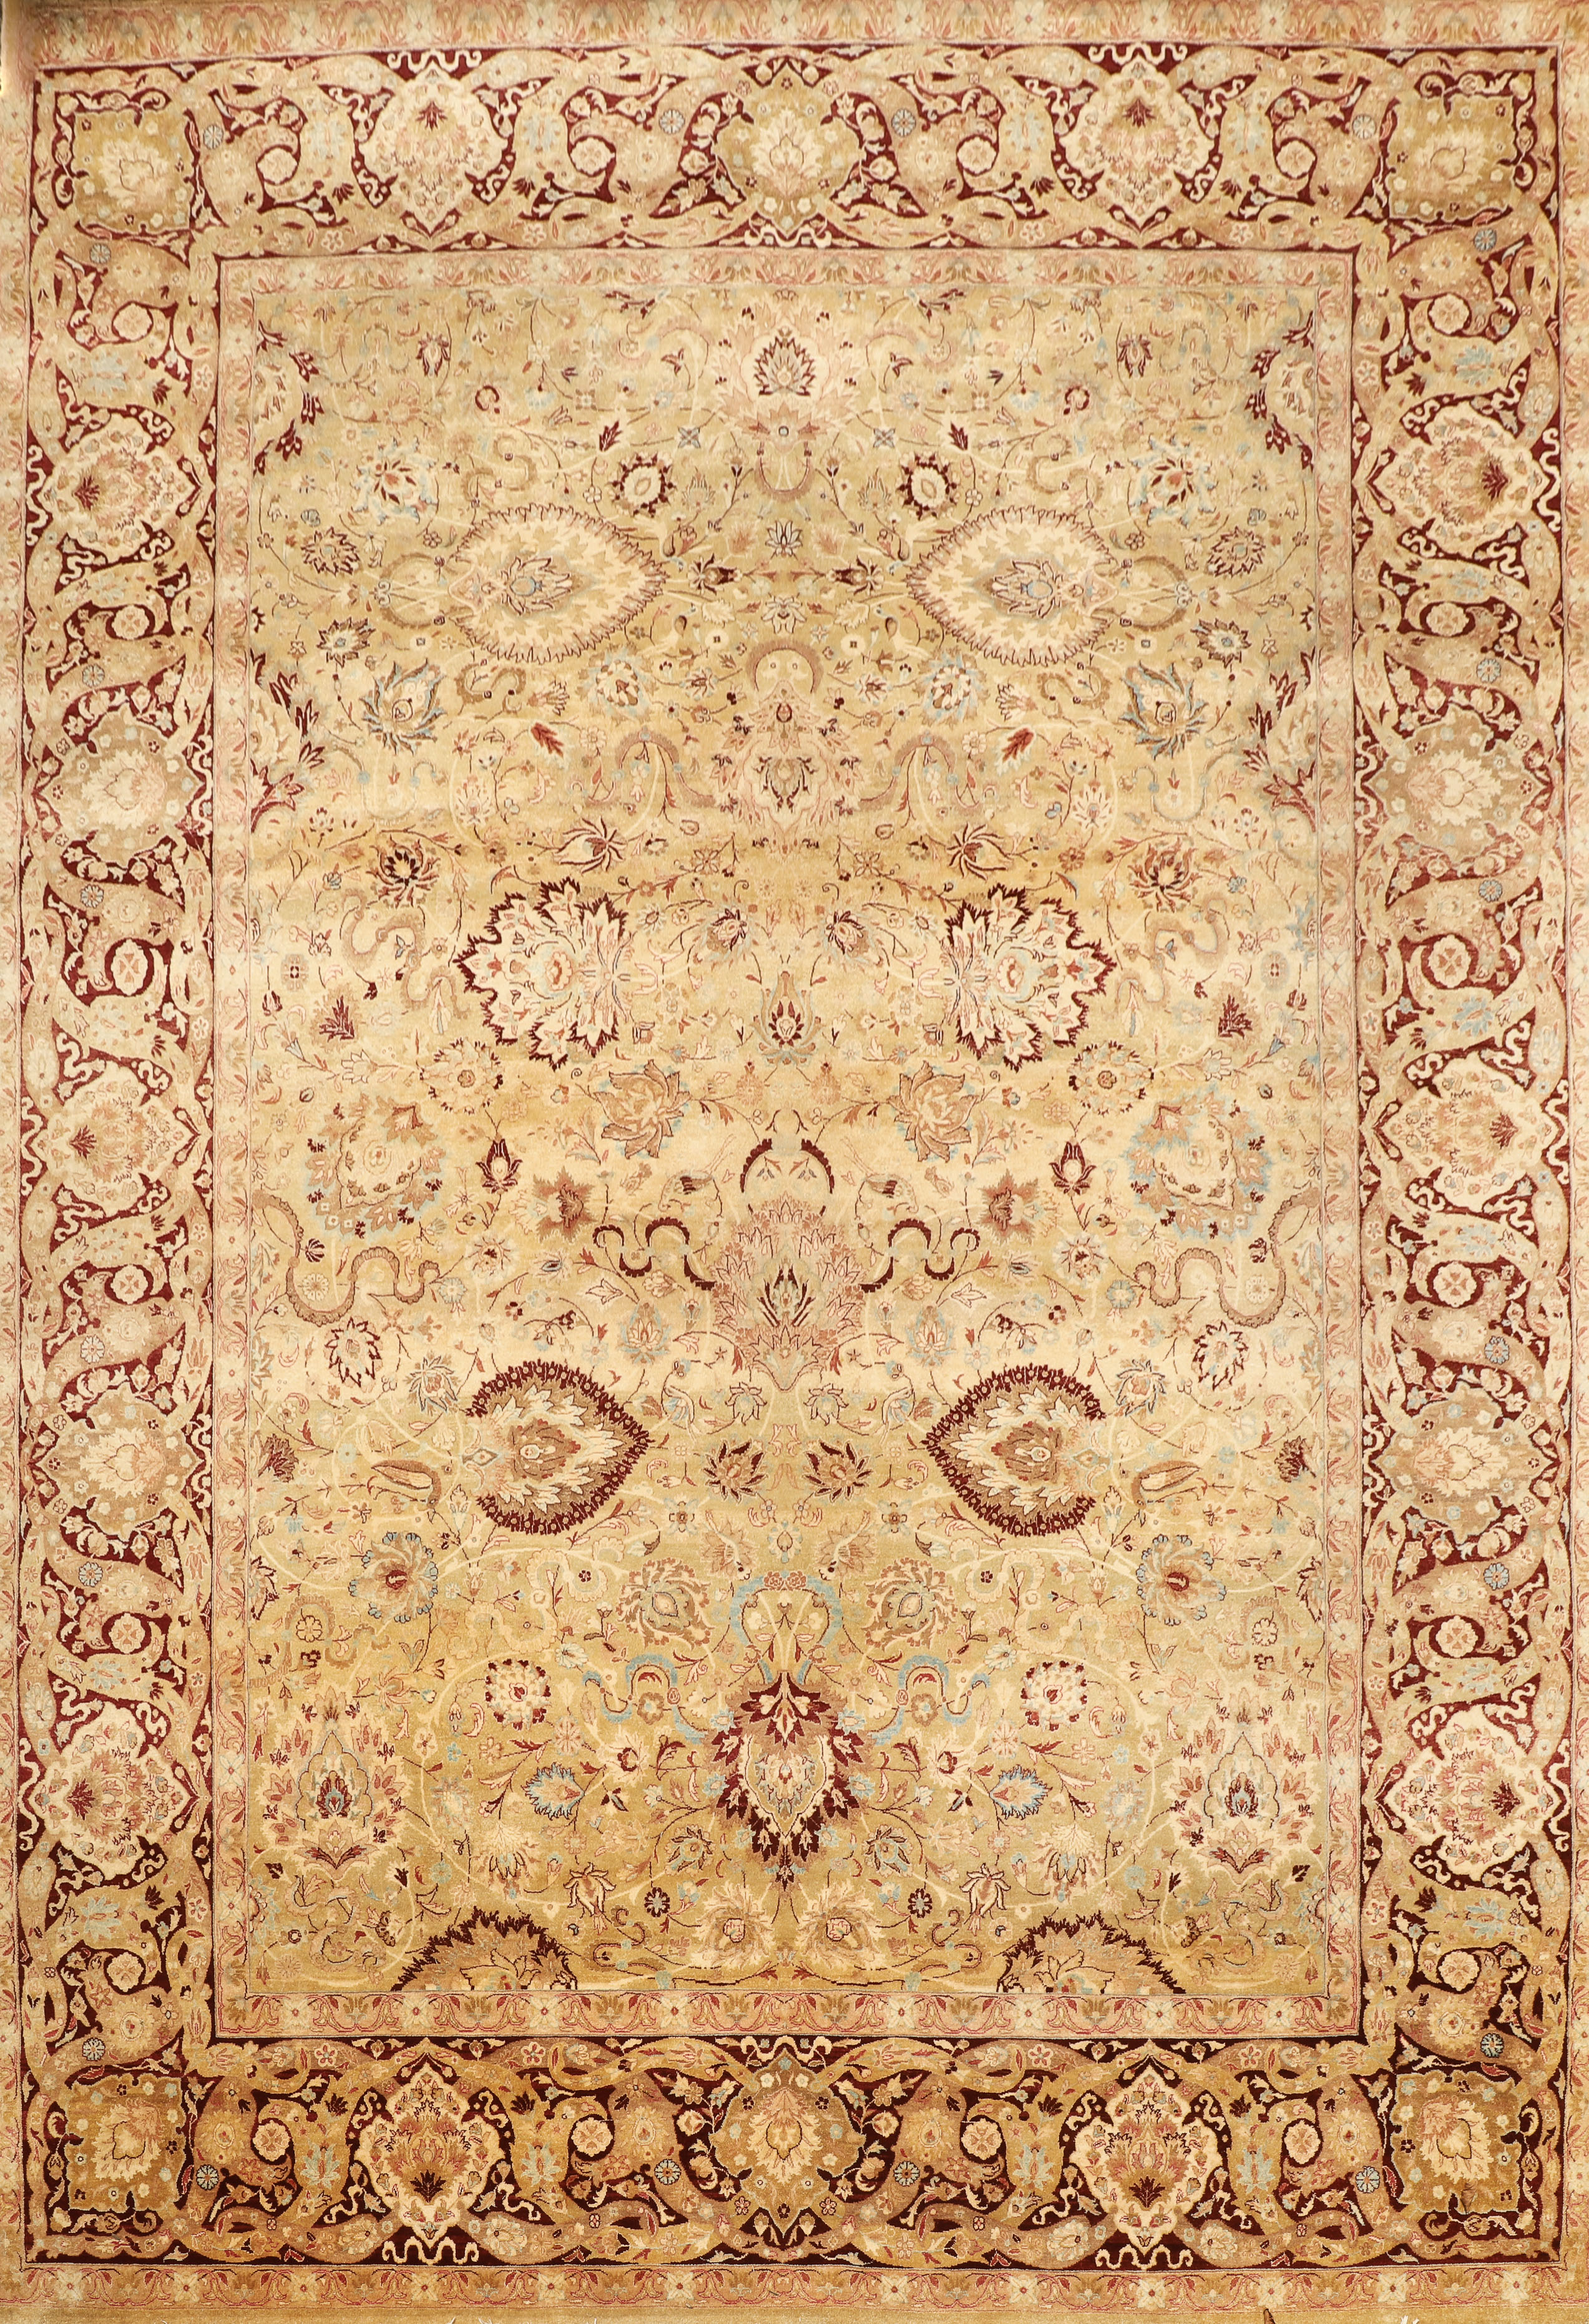 9' x 12' Afghani Carpet, stains,